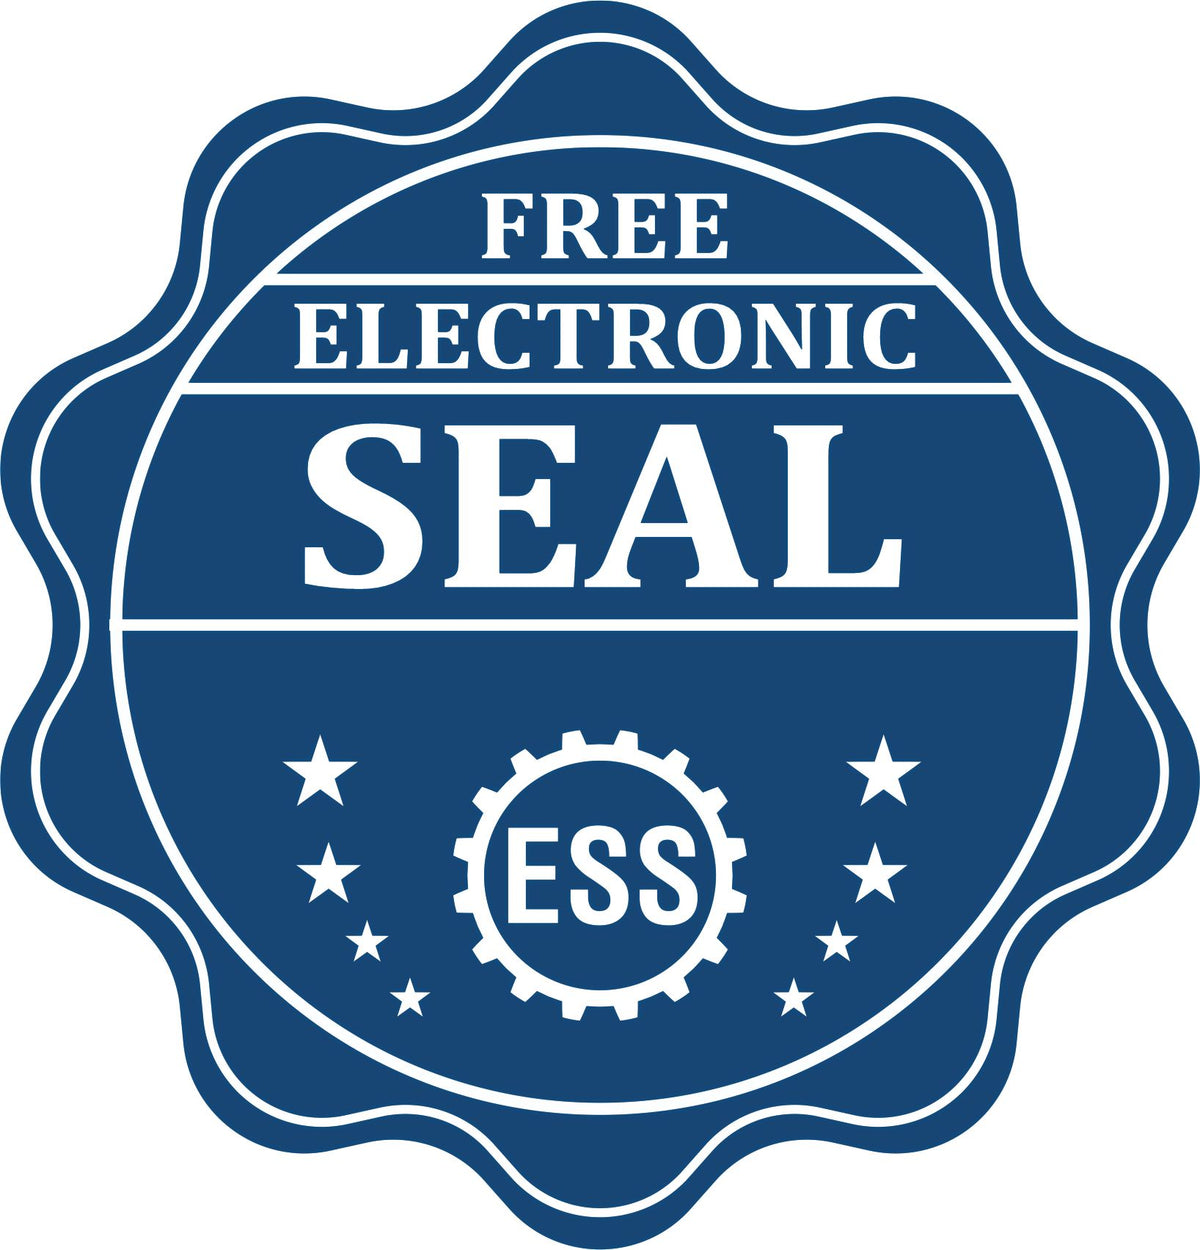 A badge showing a free electronic seal for the Super Slim Maryland Notary Public Stamp with stars and the ESS gear on the emblem.